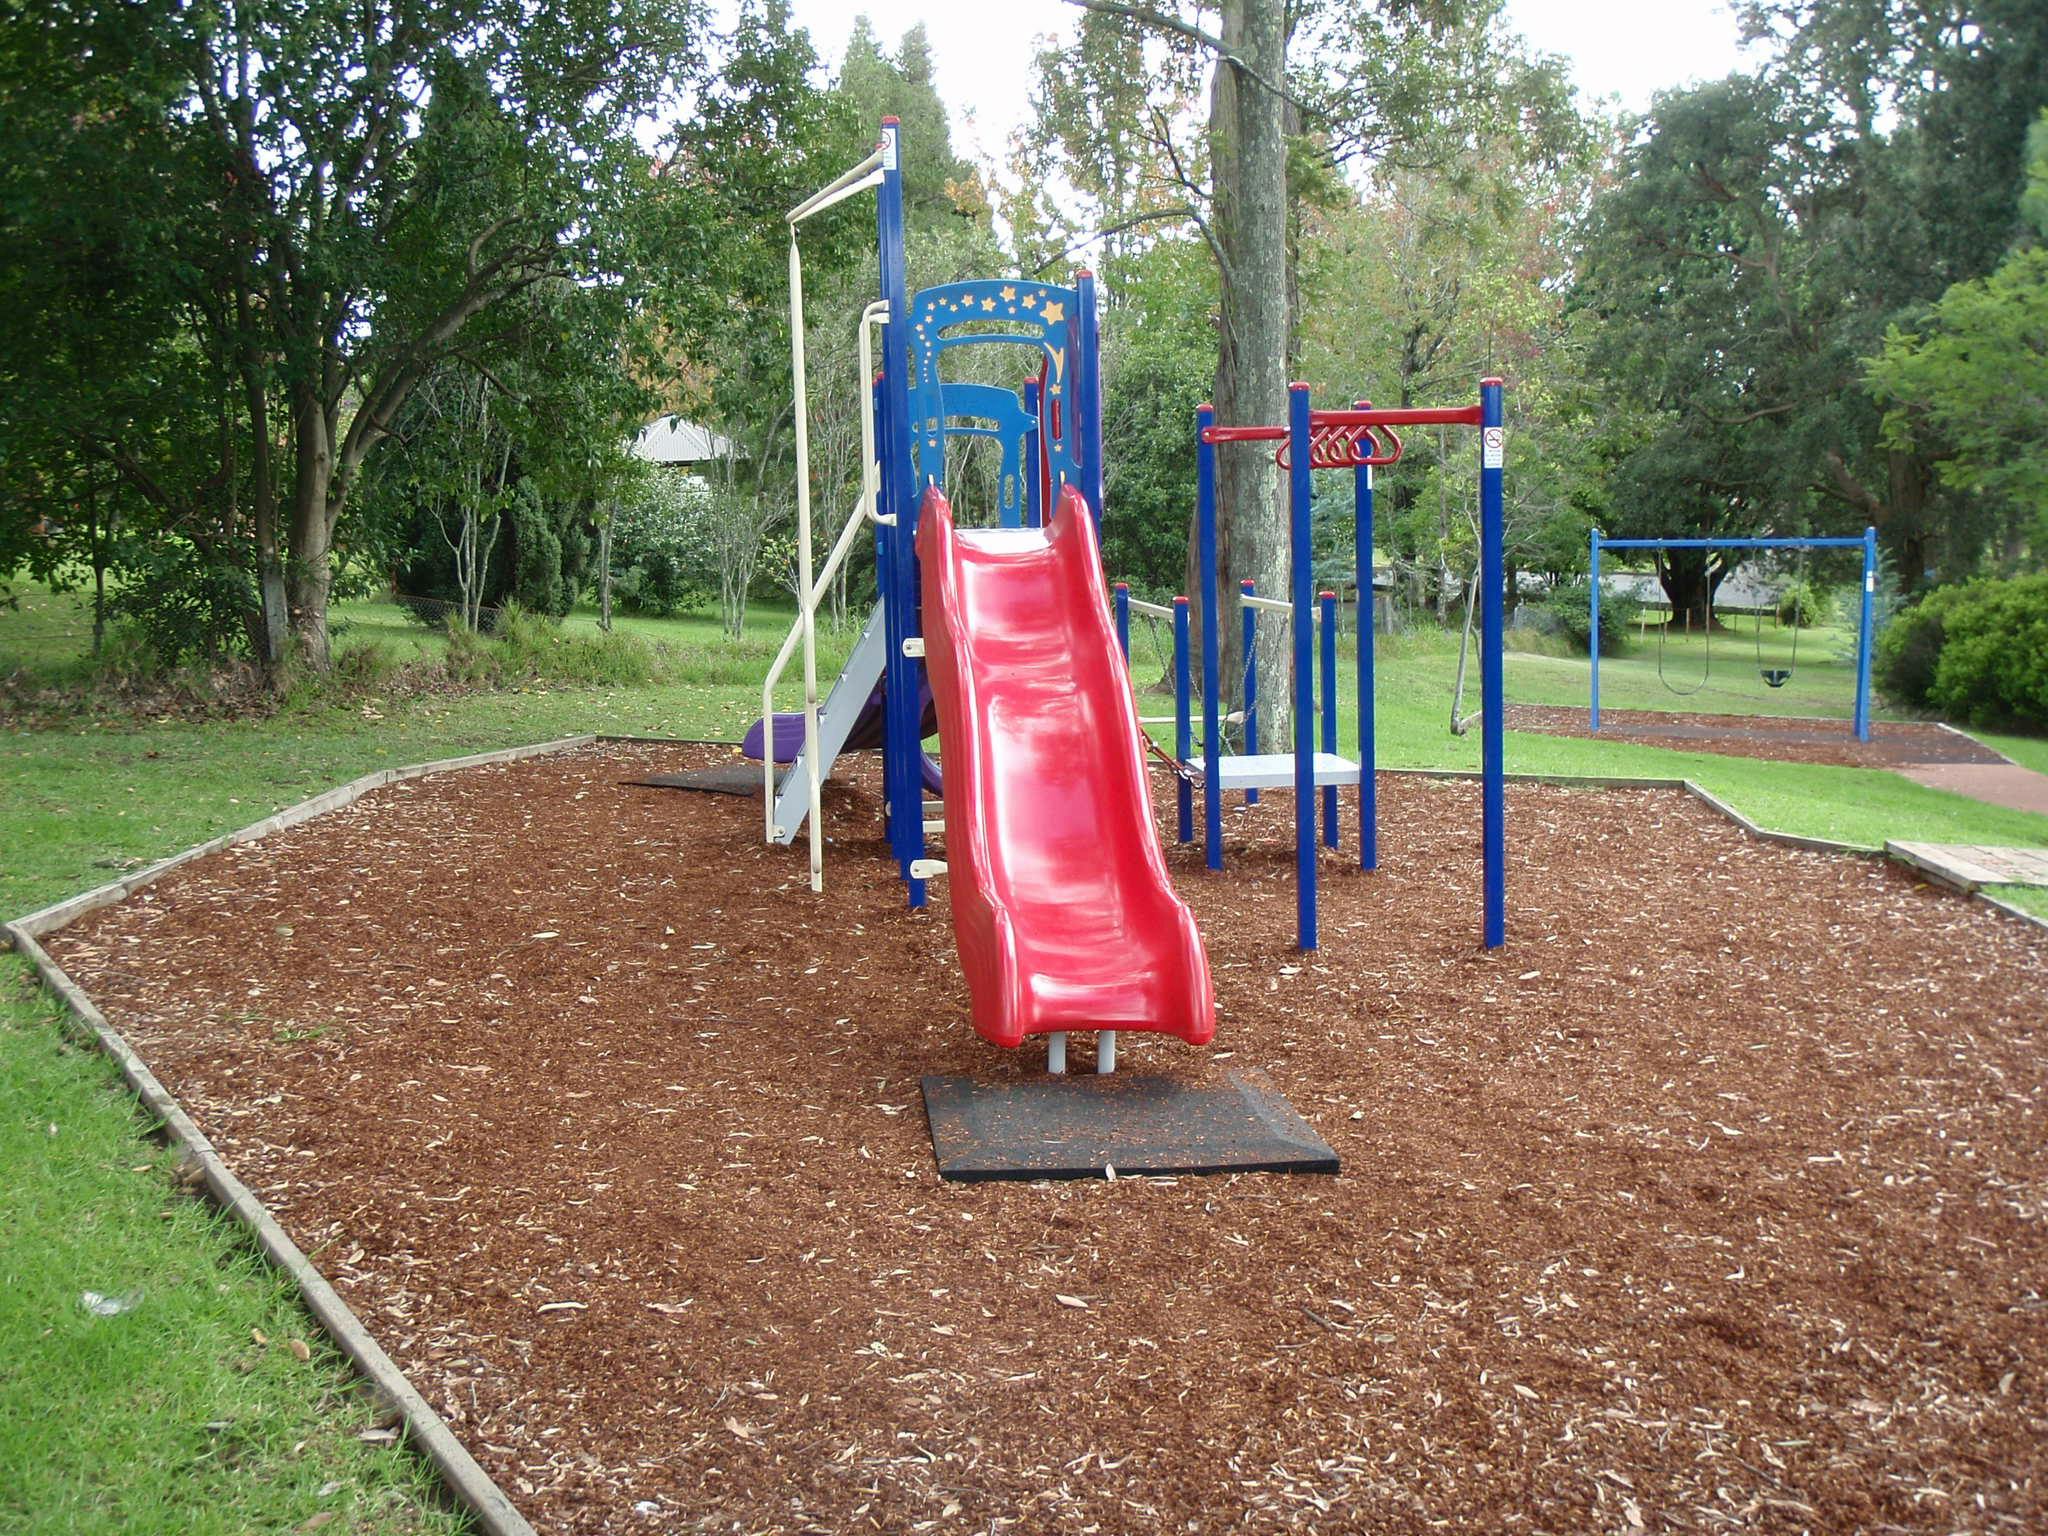 Play equipment safety upgrades